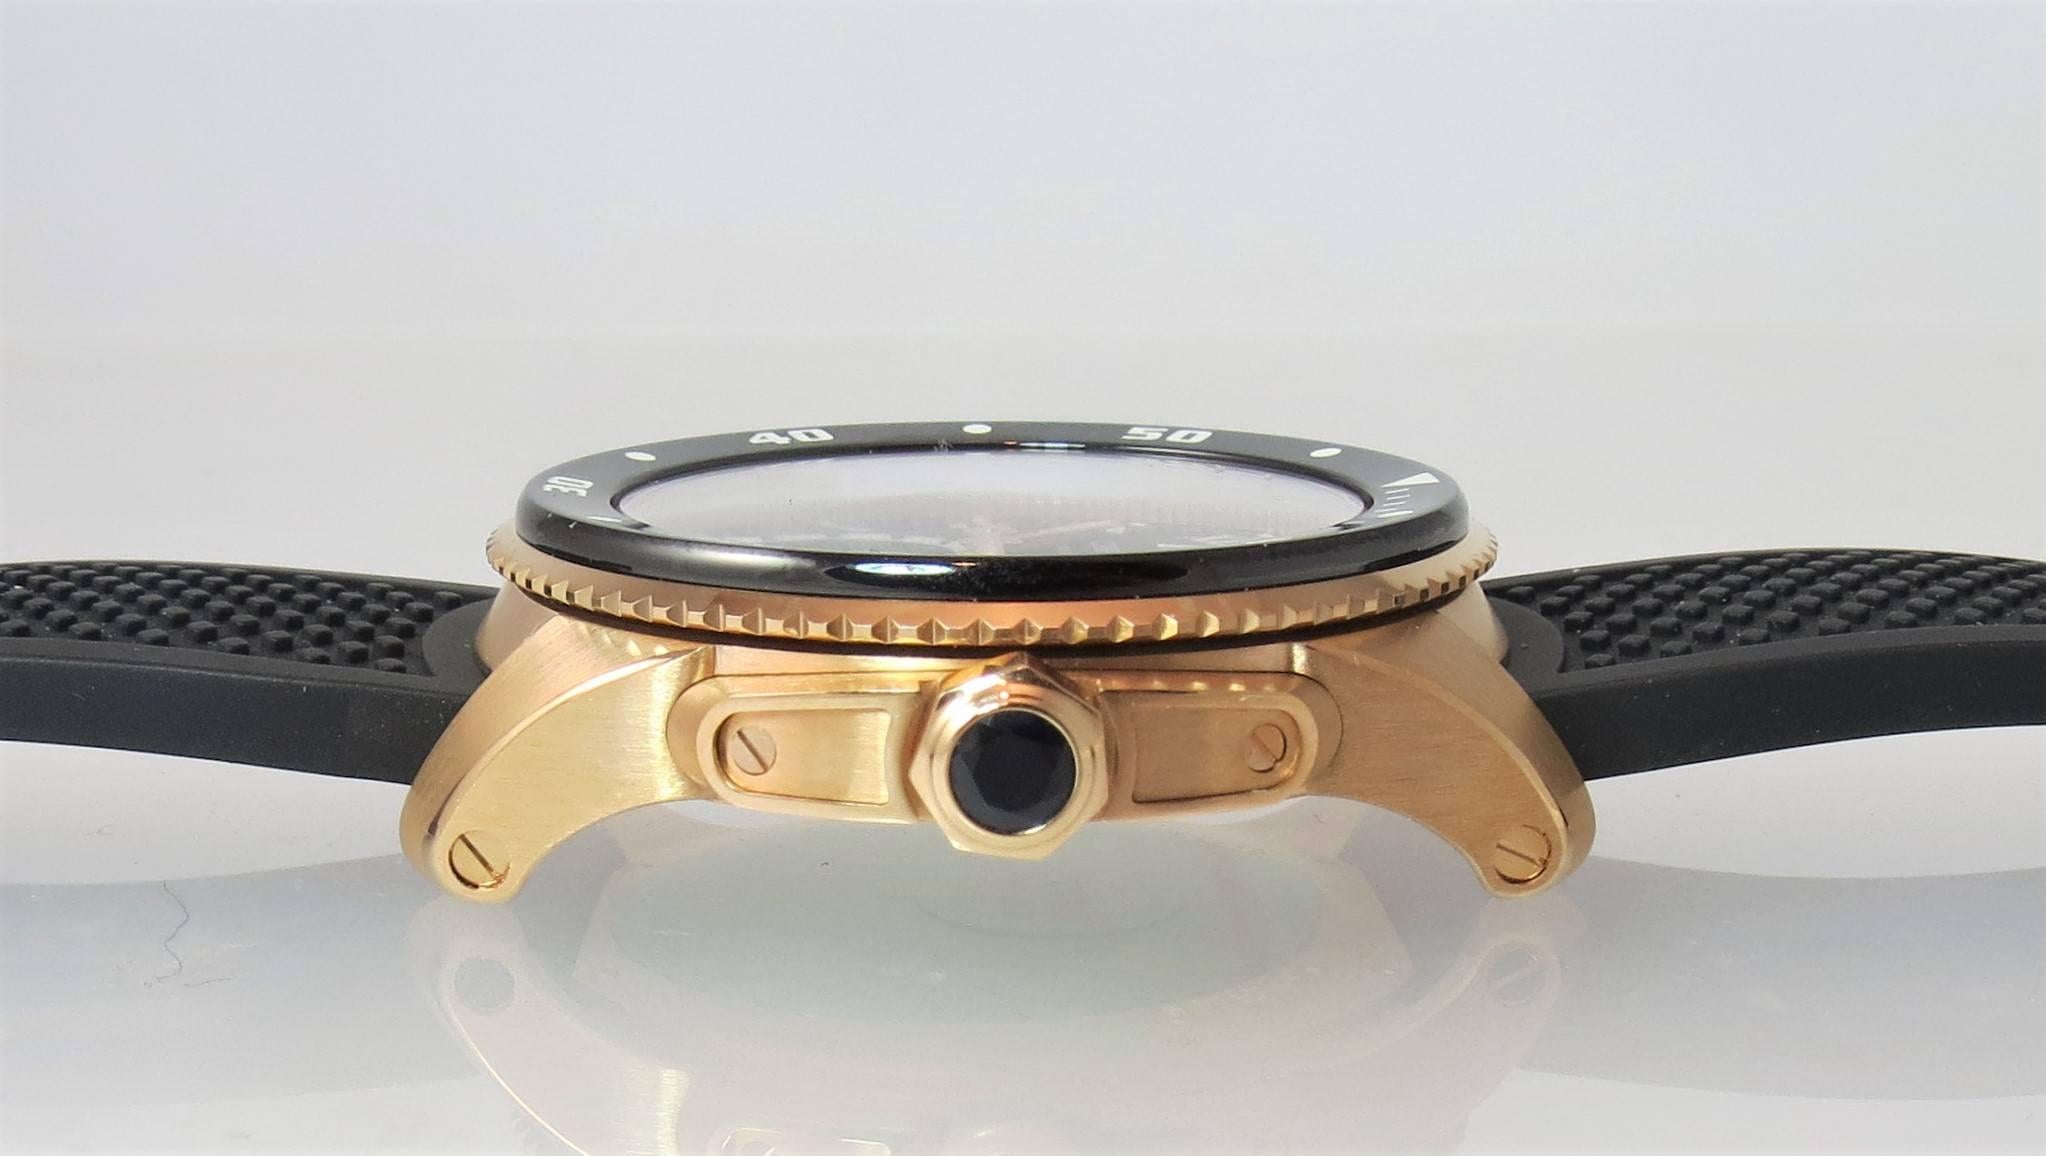 Brand new, never worn, 18K rose gold Cartier Calibre Diver watch, automatic movement, date function, 42mm case, unidirectional turning bezel, black dial, rubber strap with ardillion buckle.

Retails for $27300
Brand new, 2 year warranty